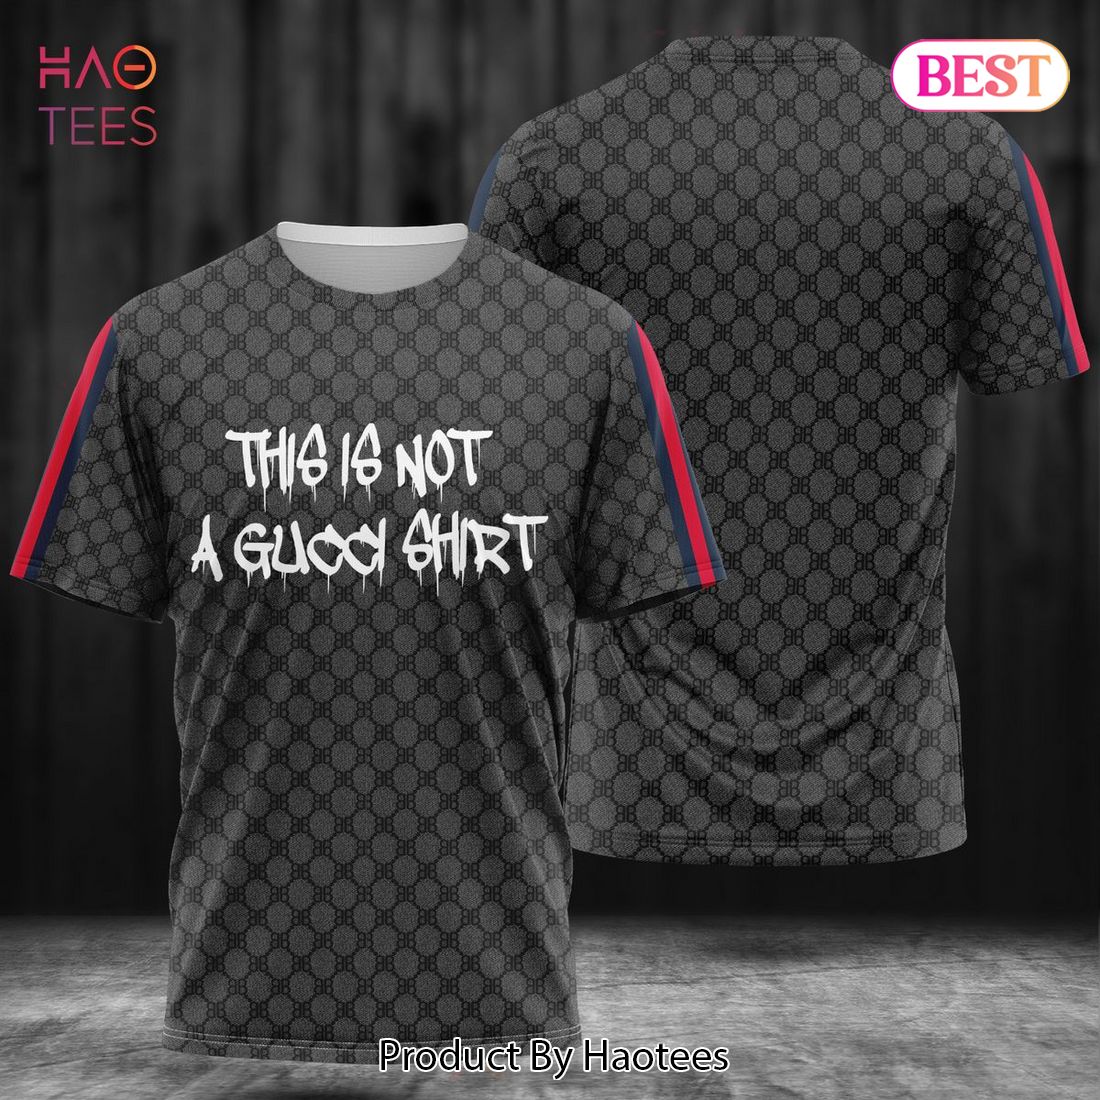 HOT This Is Not A Gucci Shirt Luxury Brand Limited Edition